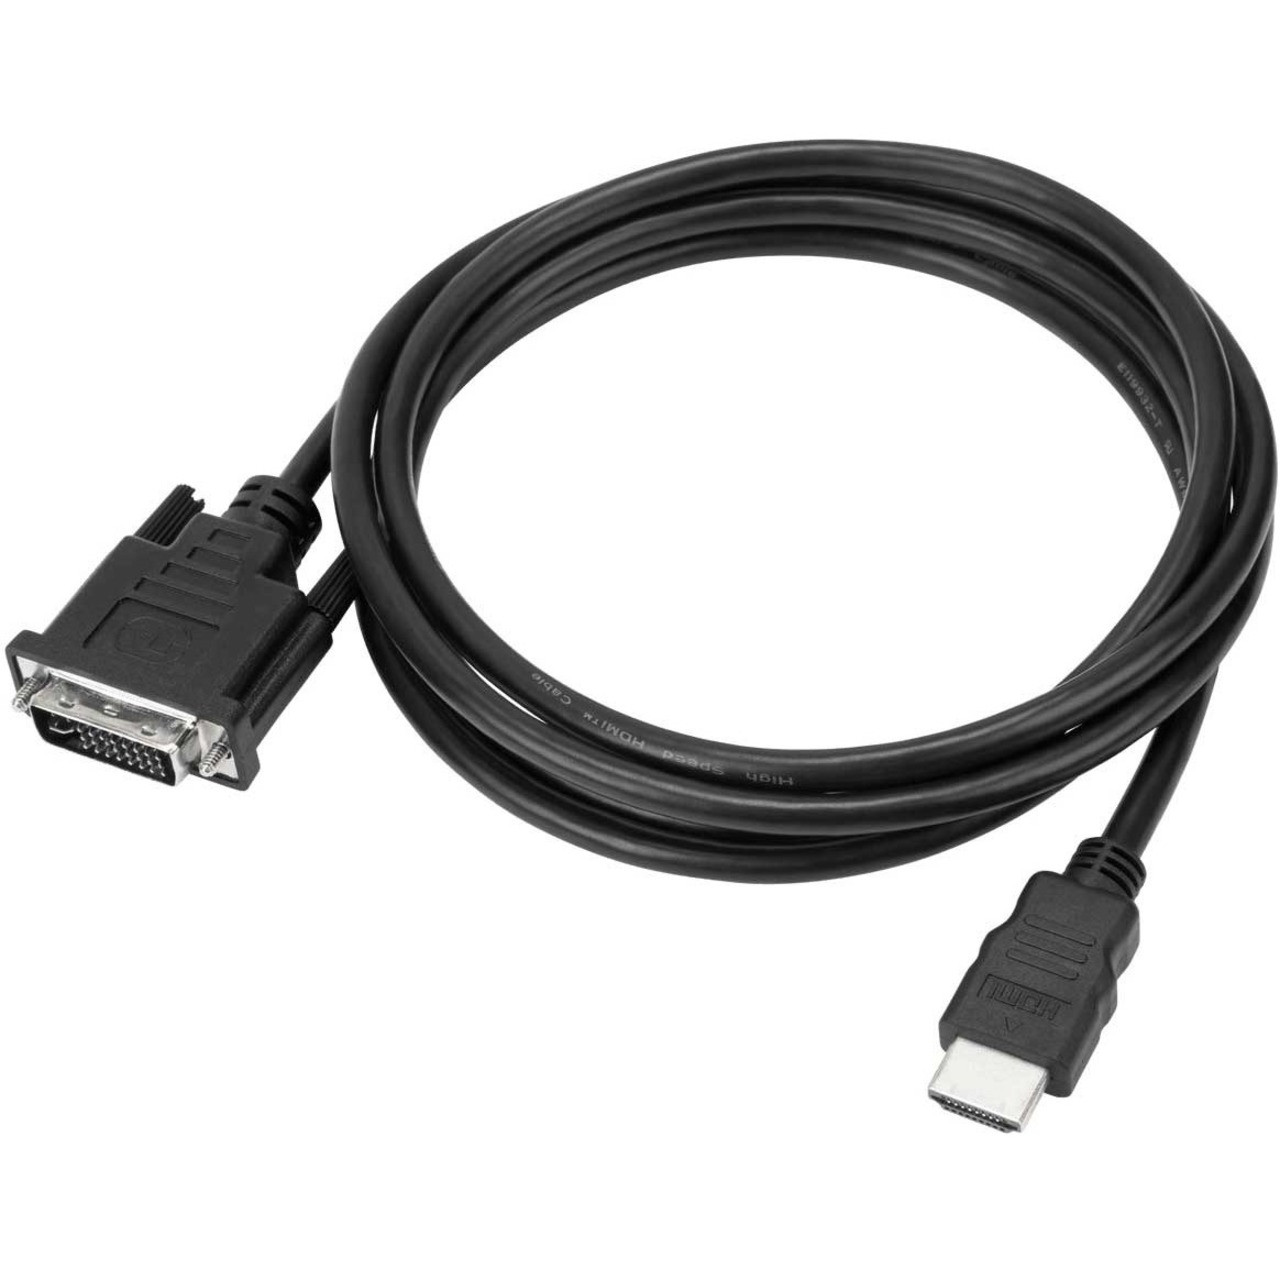 propeller kasteel Geleerde Targus 1.8M HDMI (M) to DVI (M) Cable6 ft DVI/HDMI Video Cable for Video  Device, Notebook, DVD Player, TVFirst End: 1 x HDMI Digital Aud...  ACC973USZ - Corporate Armor